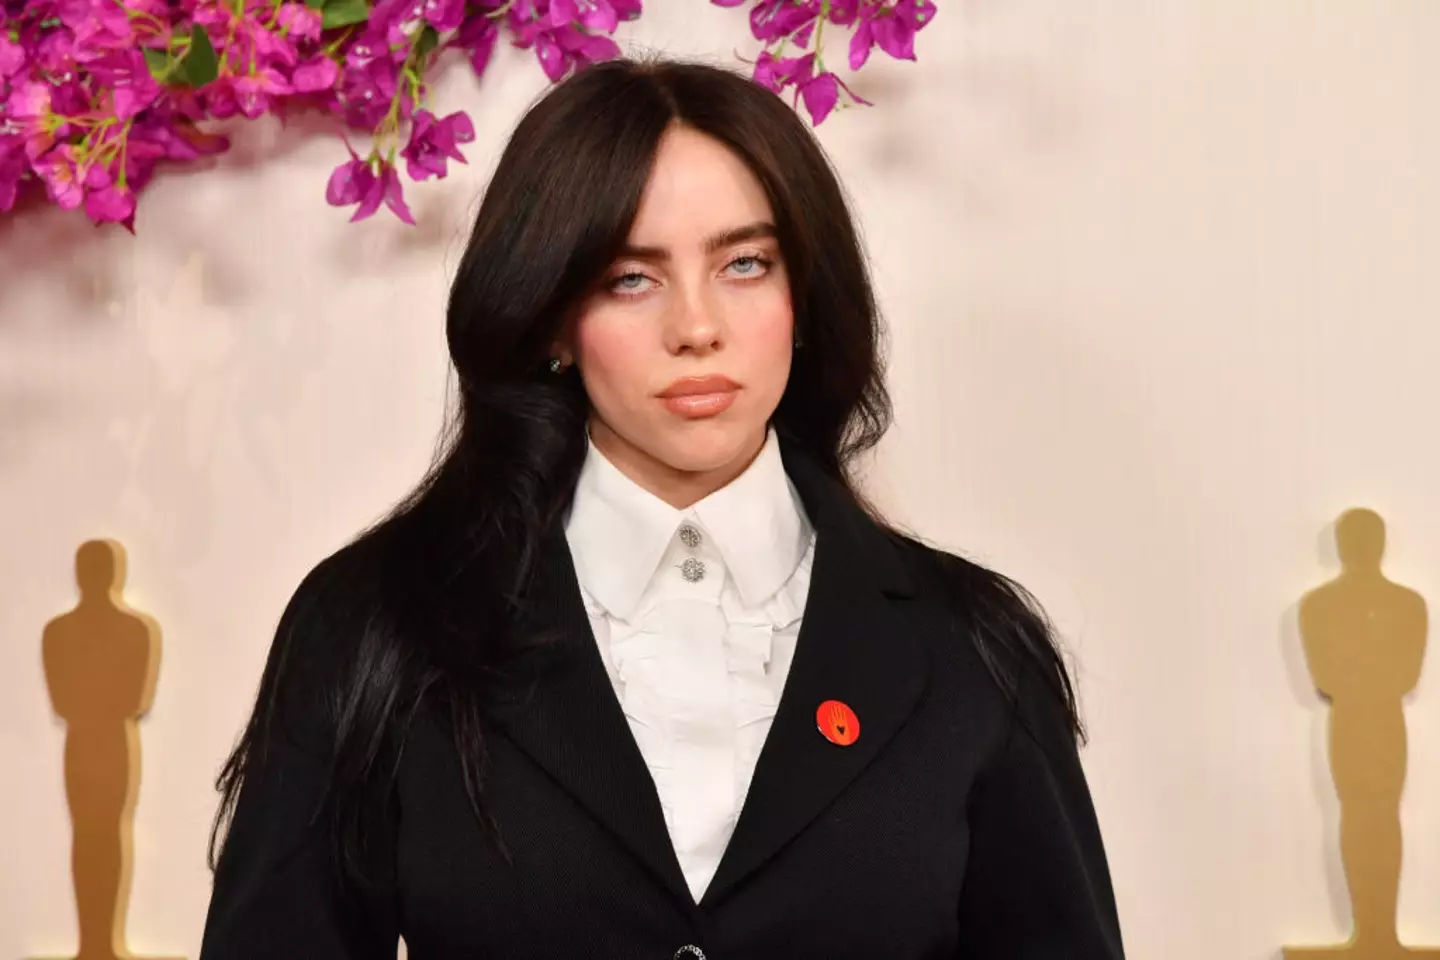 Billie Eilish revealed the one x-rated thing she enjoys to do in front of a mirror. (Sarah Morris/WireImage)